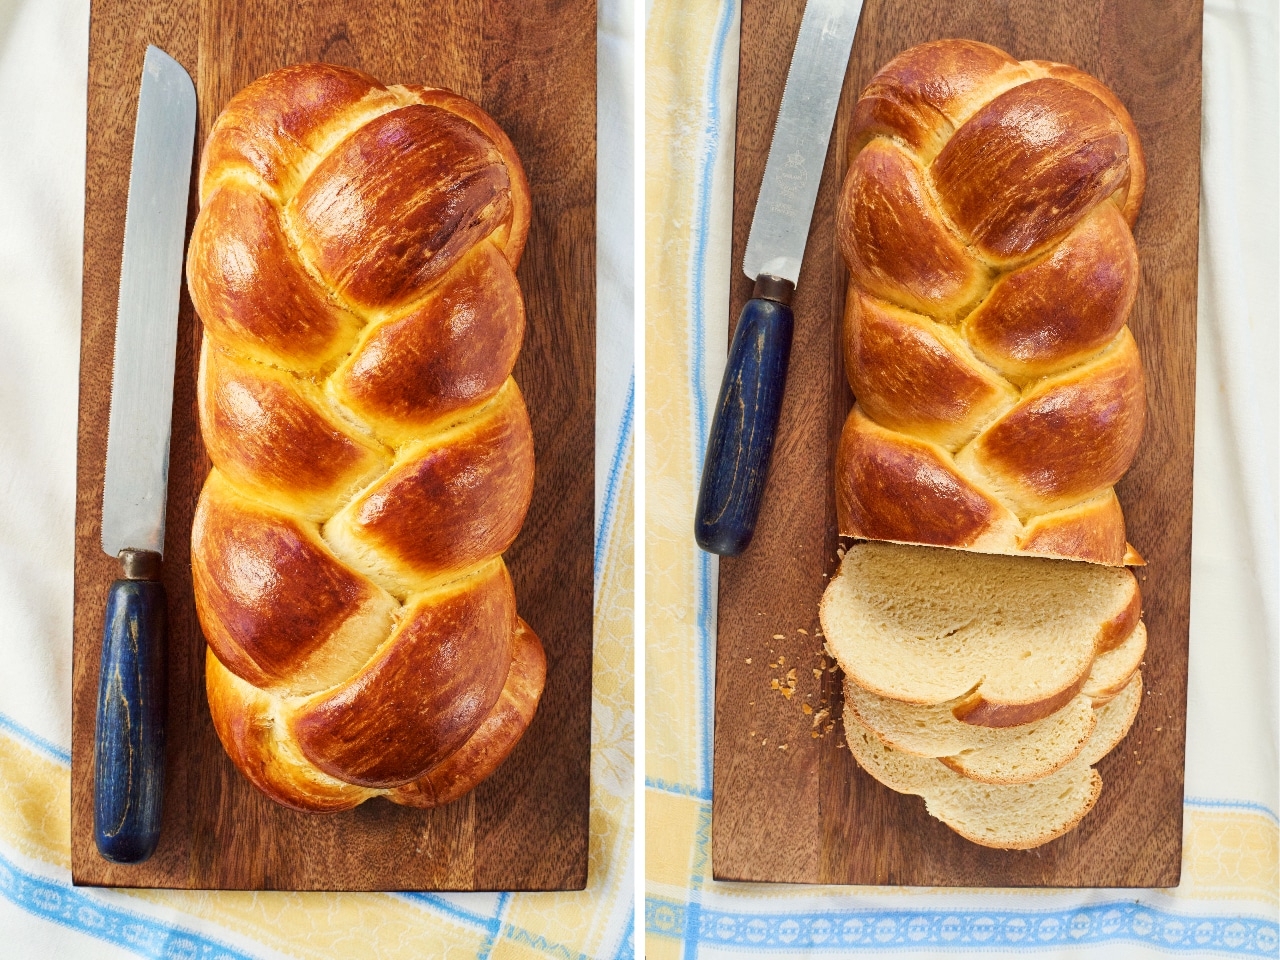 Homemade Challah bread in a side-by-side photo. On the left, the loaf is uncut, on the right, three slices have been made.